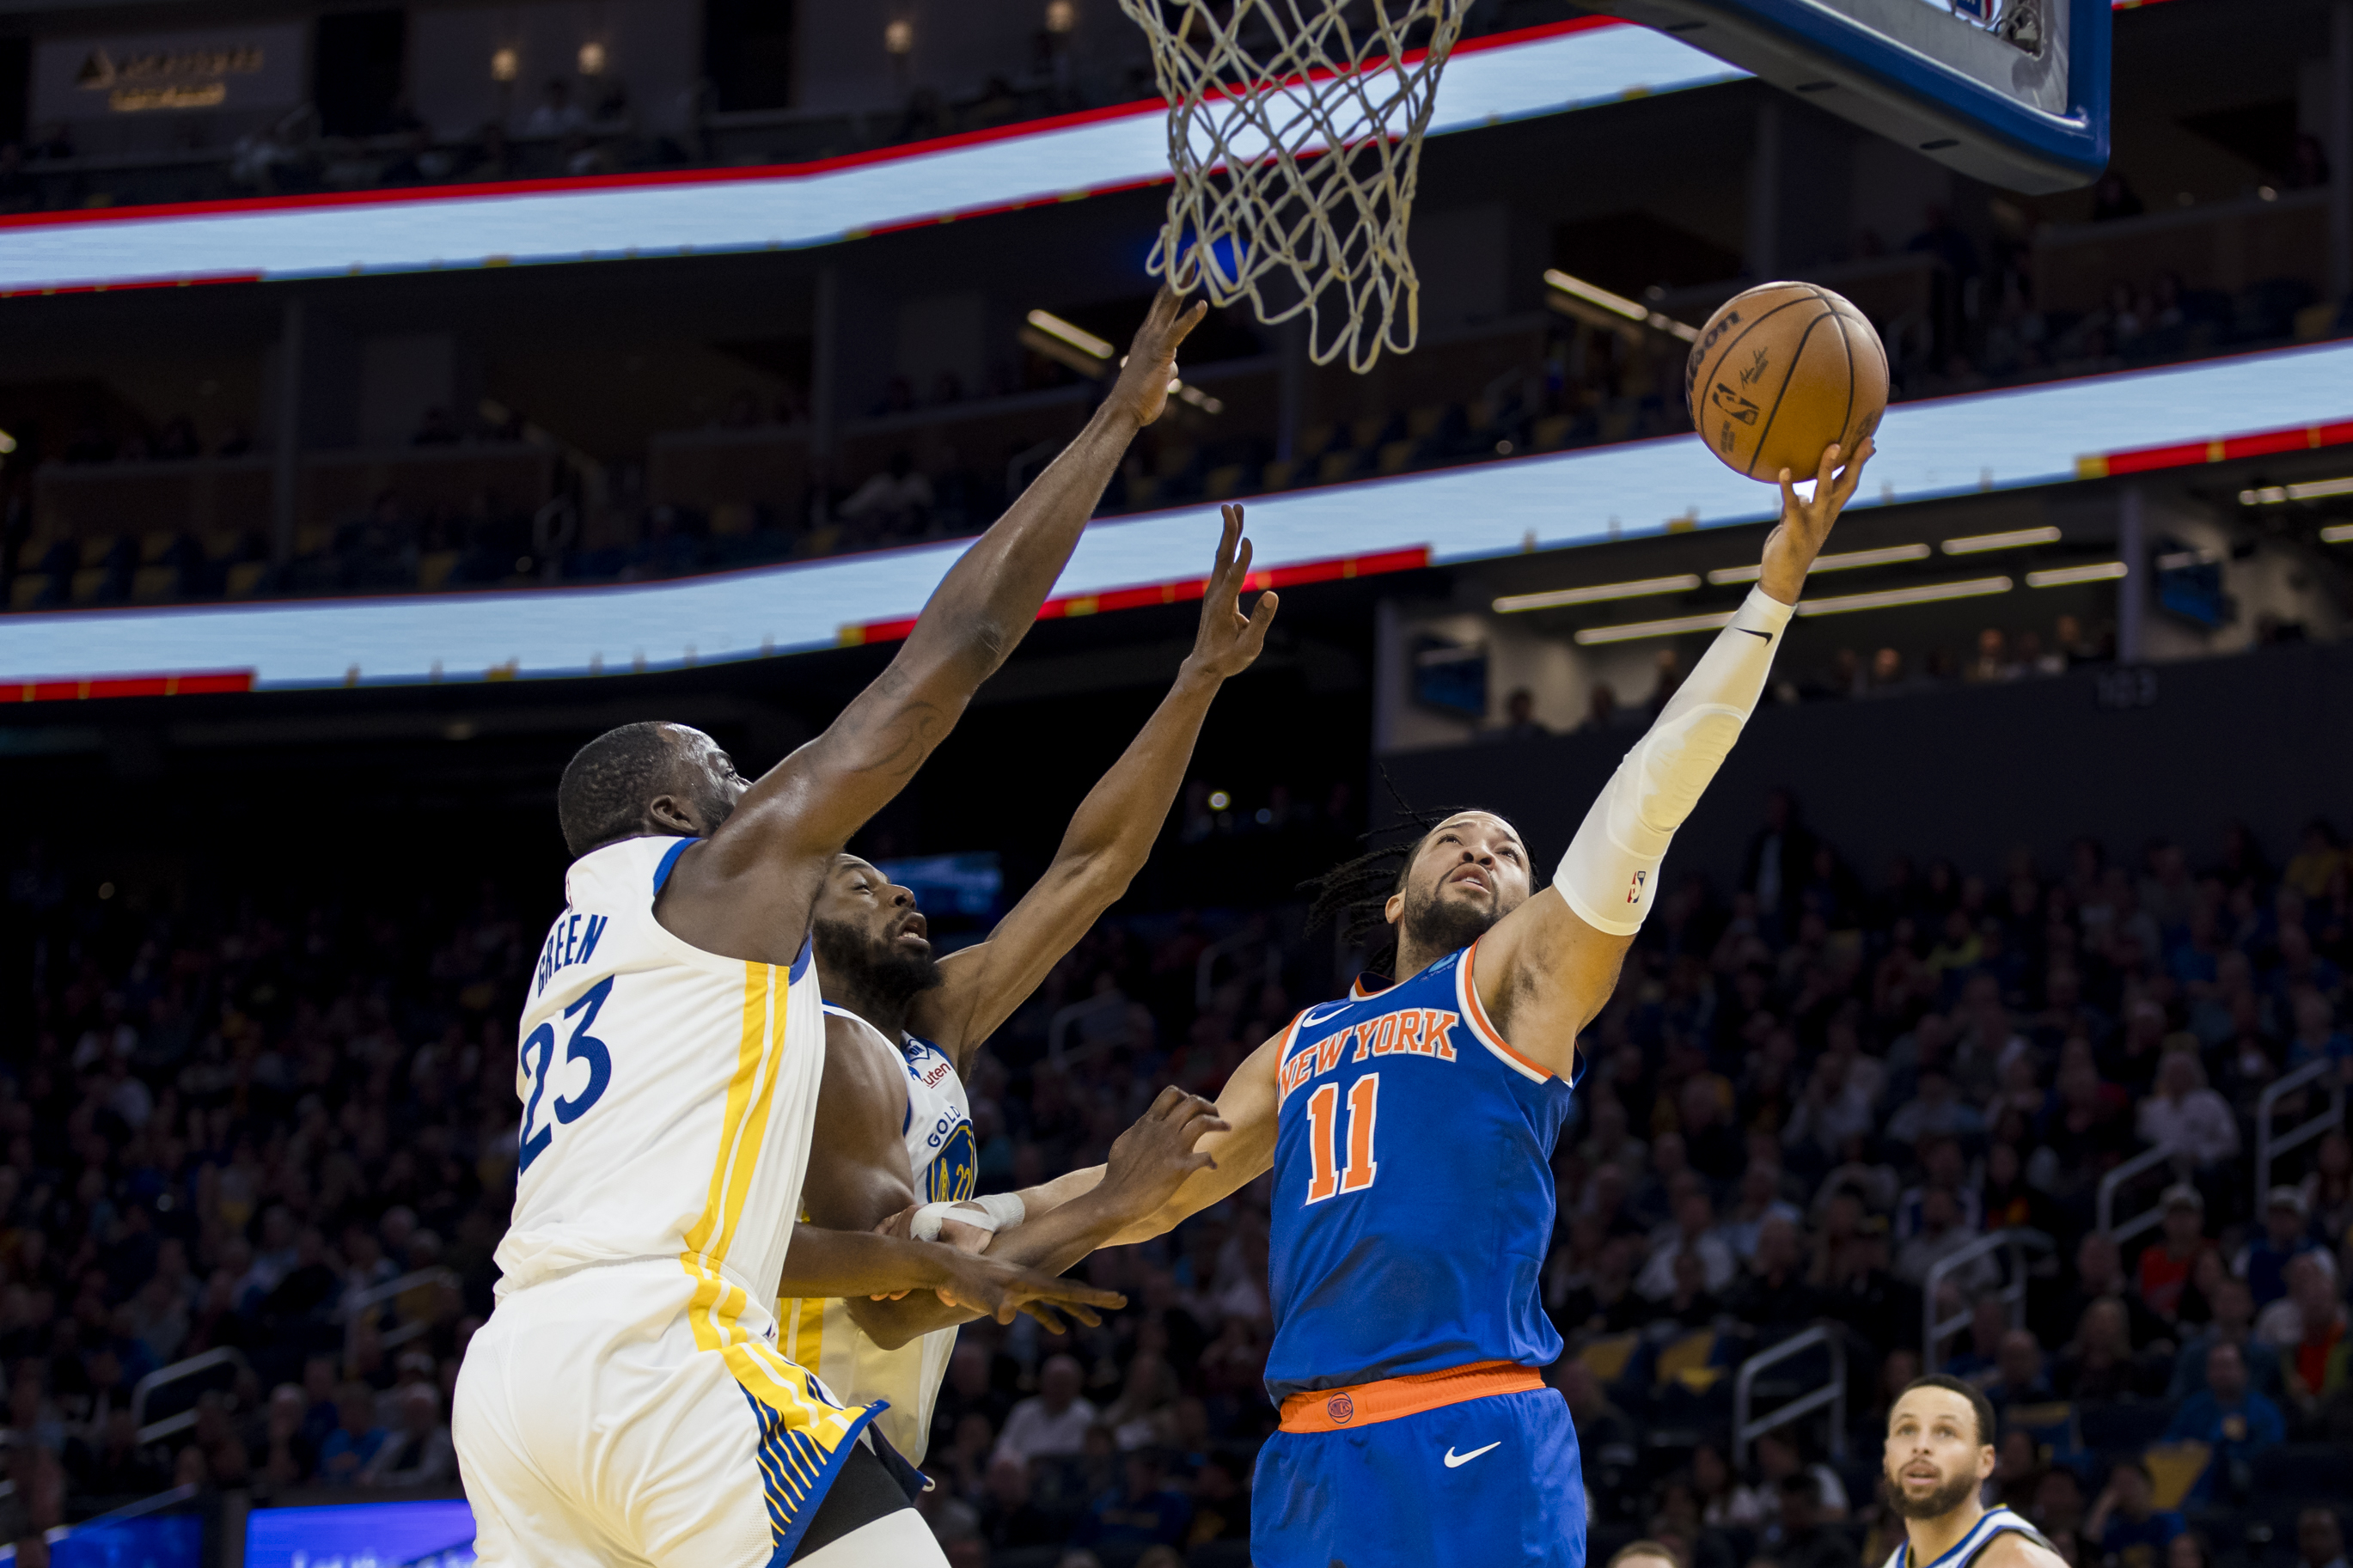 New York Knicks guard Jalen Brunson (11) shoots as Golden State Warriors center Draymond Green (23) and forward Andrew Wiggins (22) defend during the first half at Chase Center